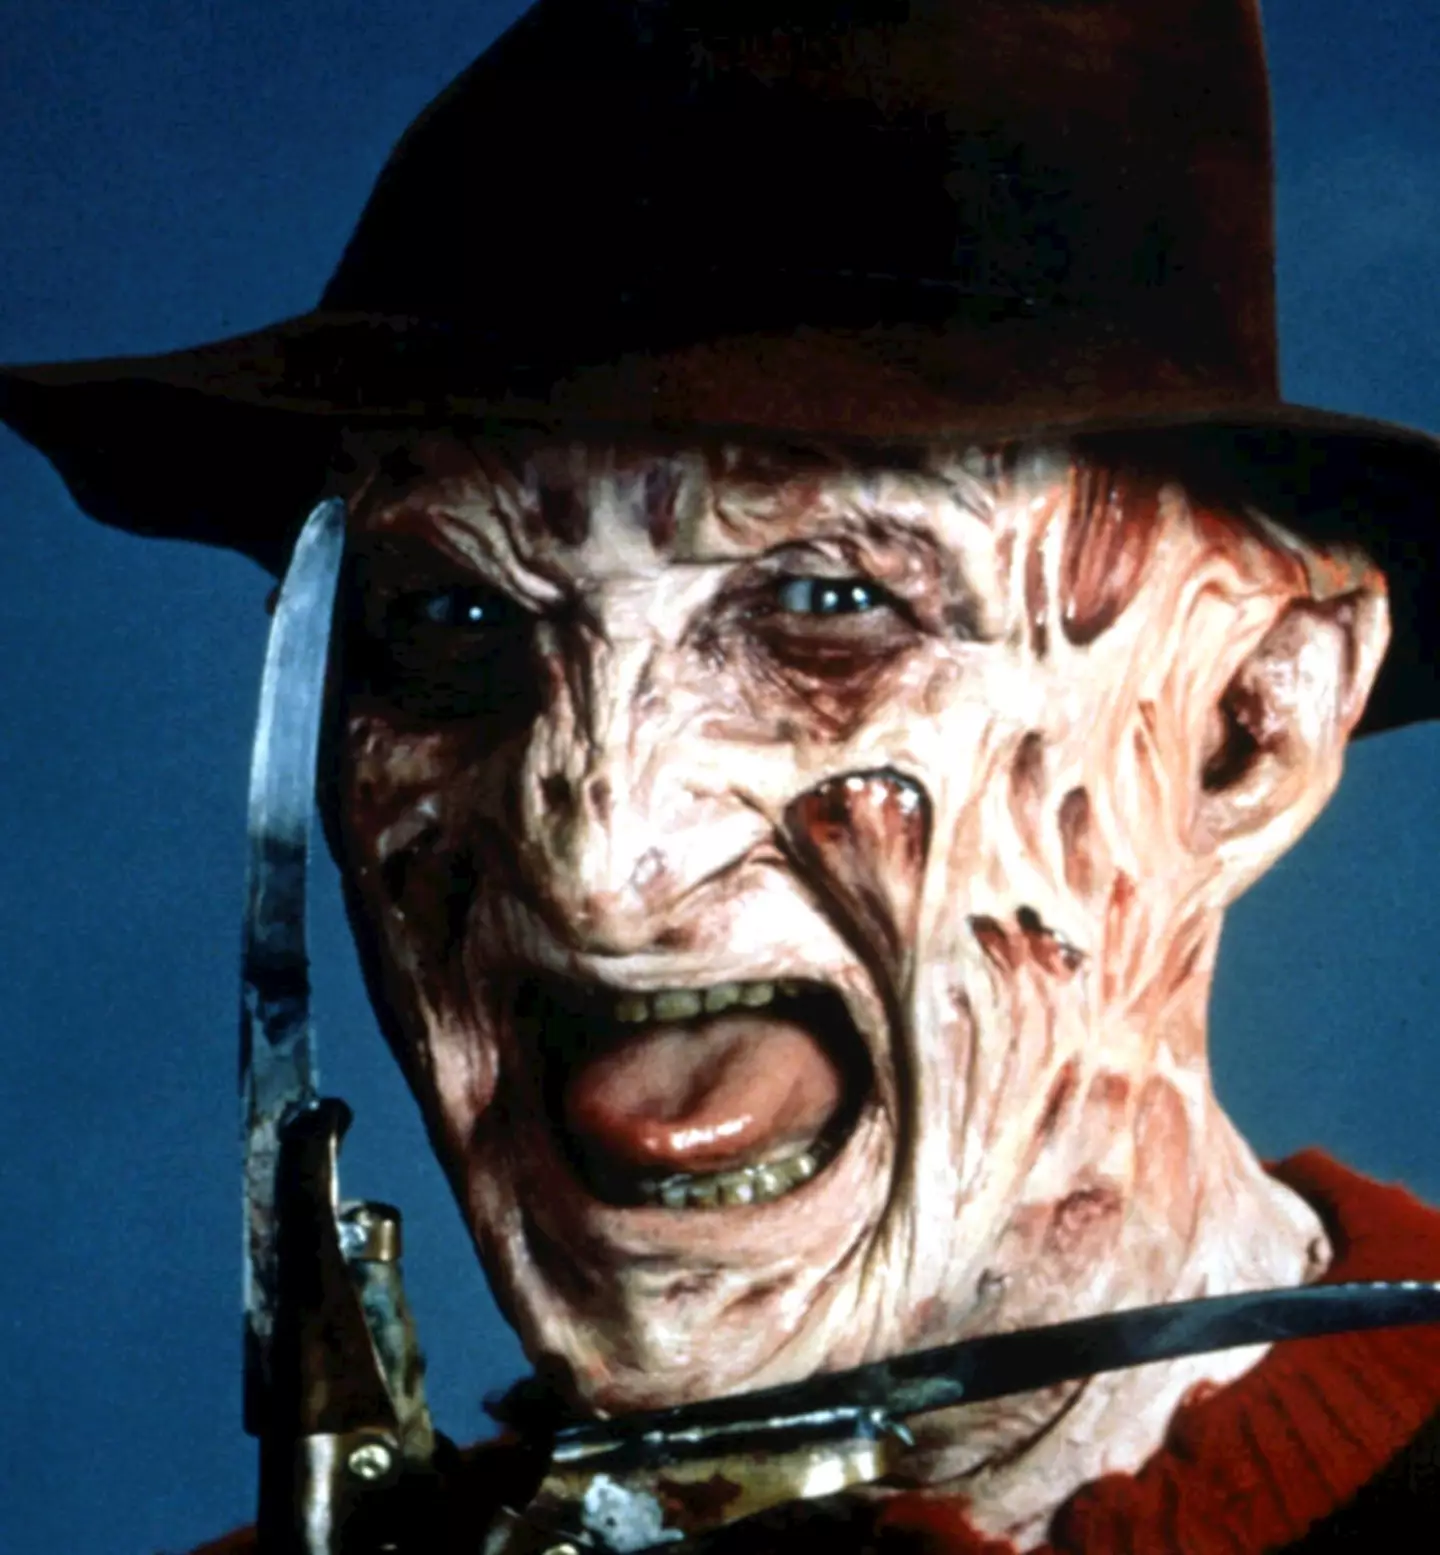 Freddy Krueger has been scaring horror fans for decades.